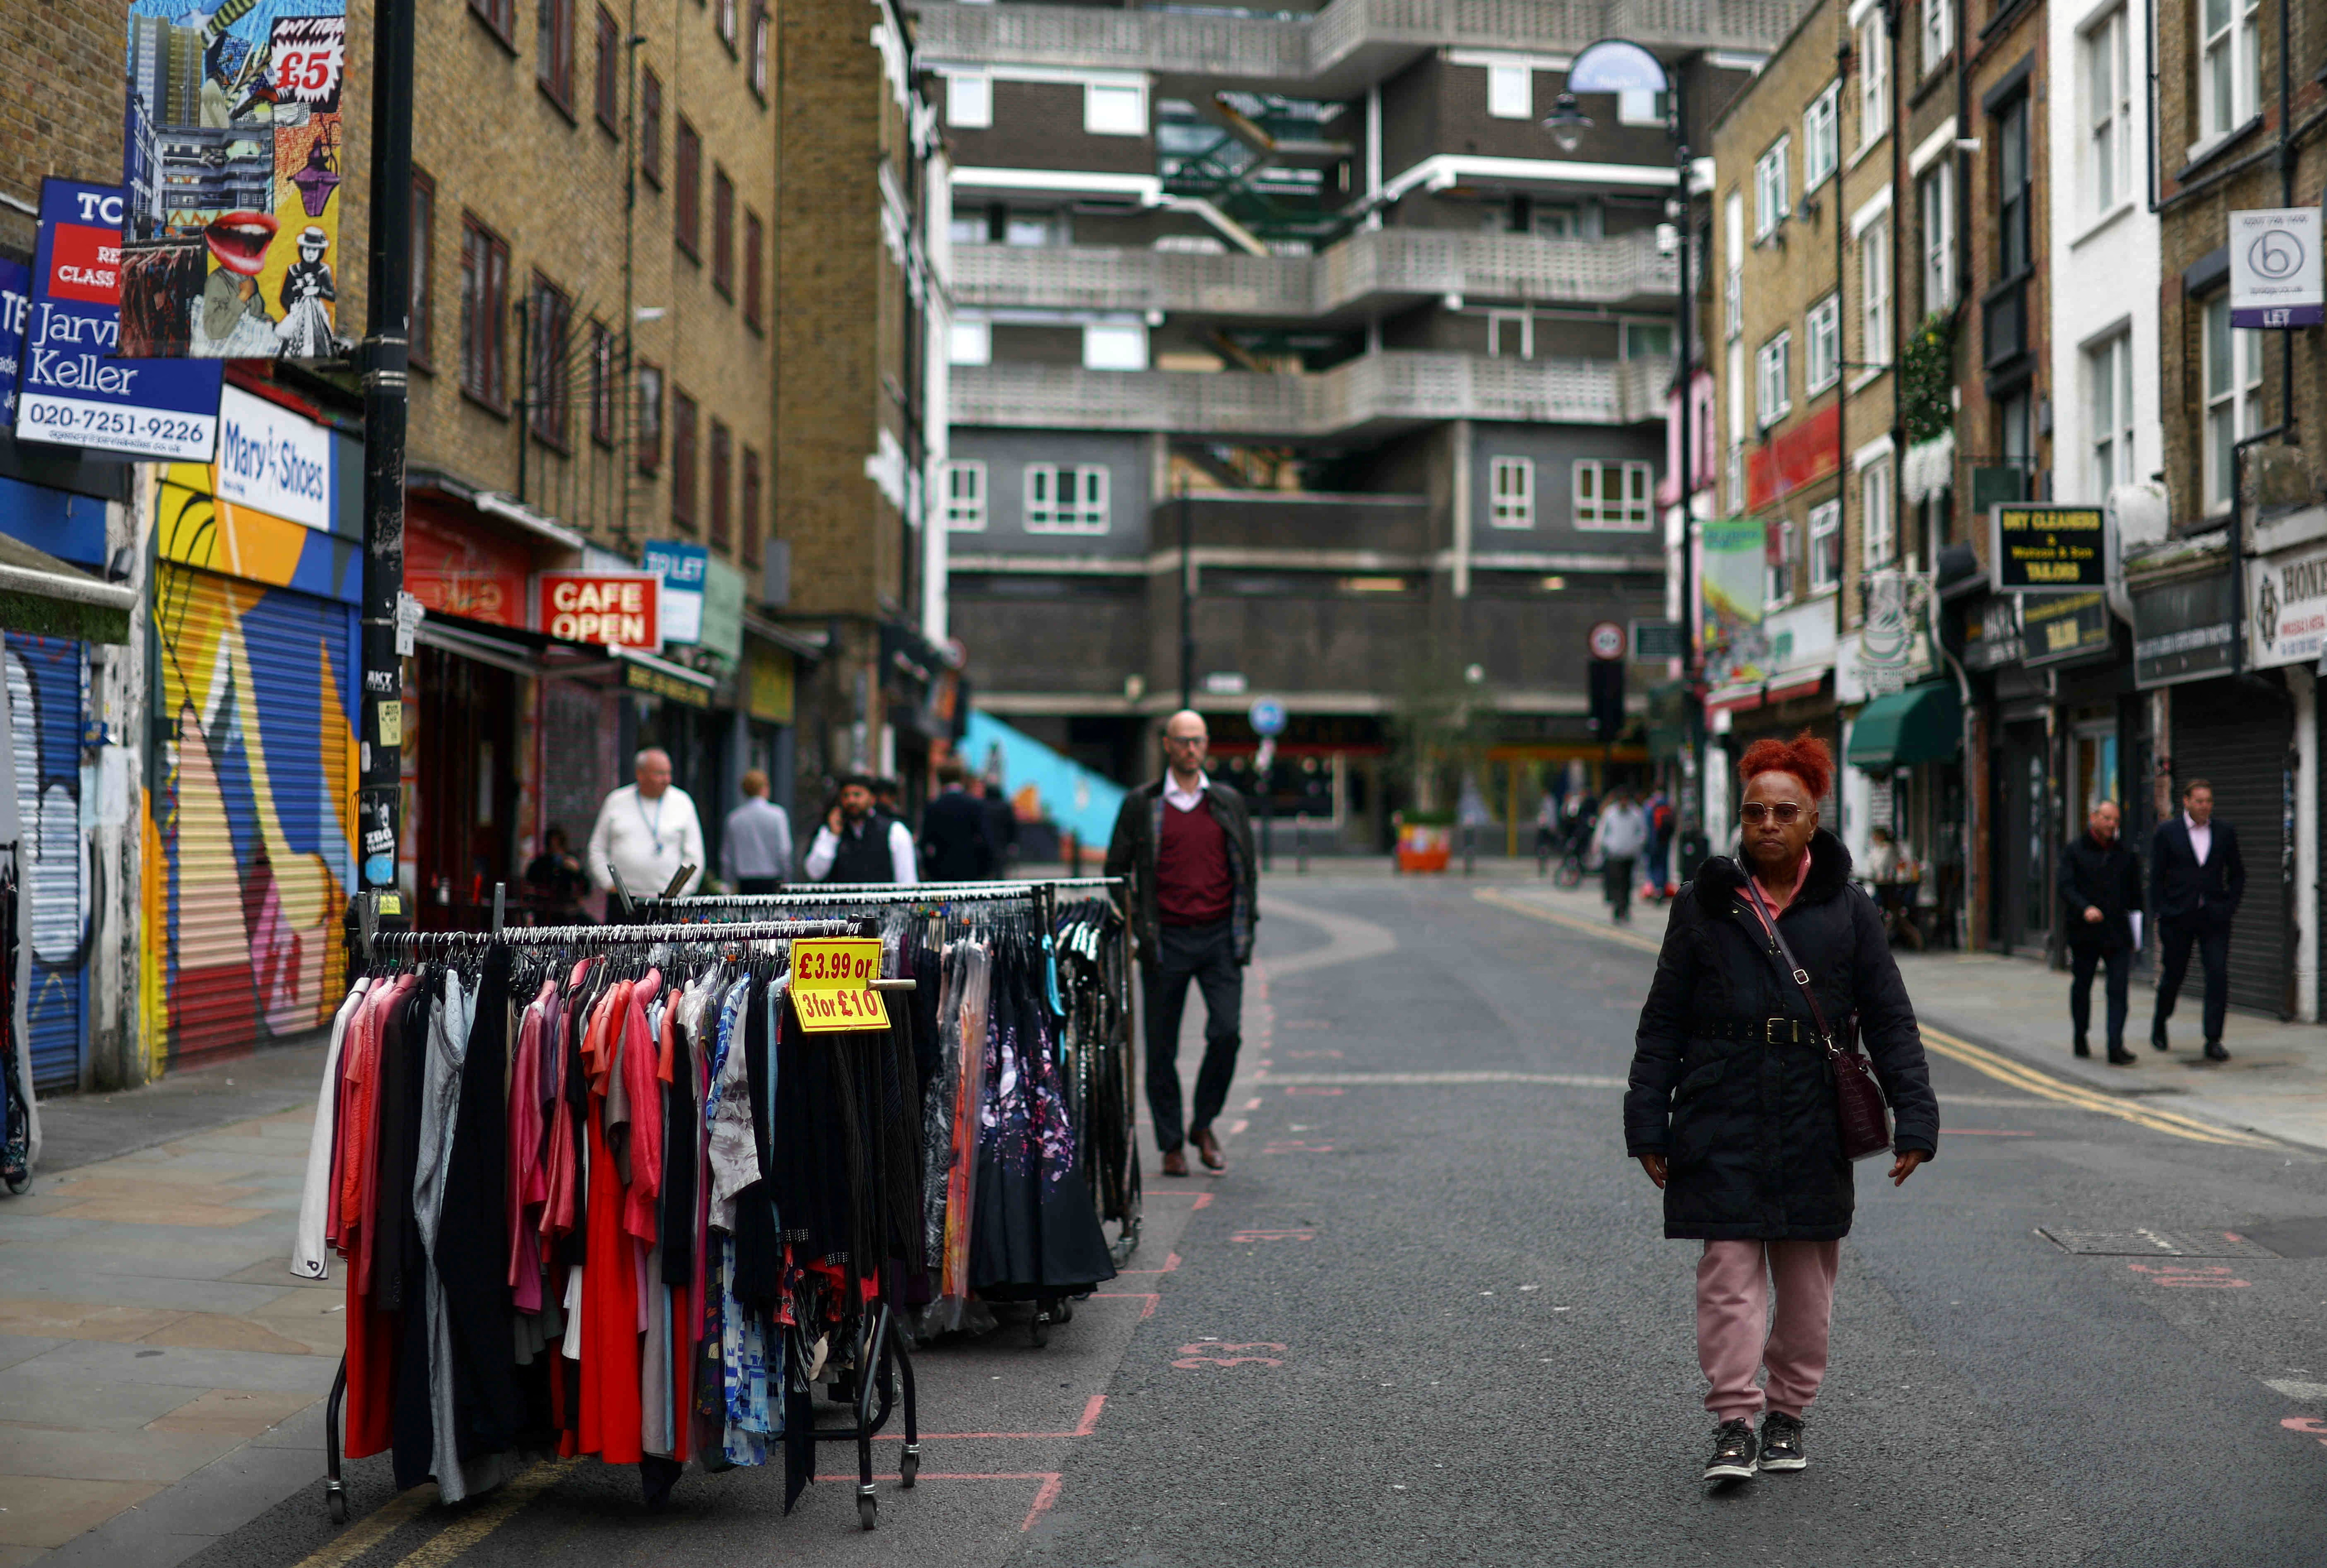 A woman walks past a clothes rail with items for sale in London